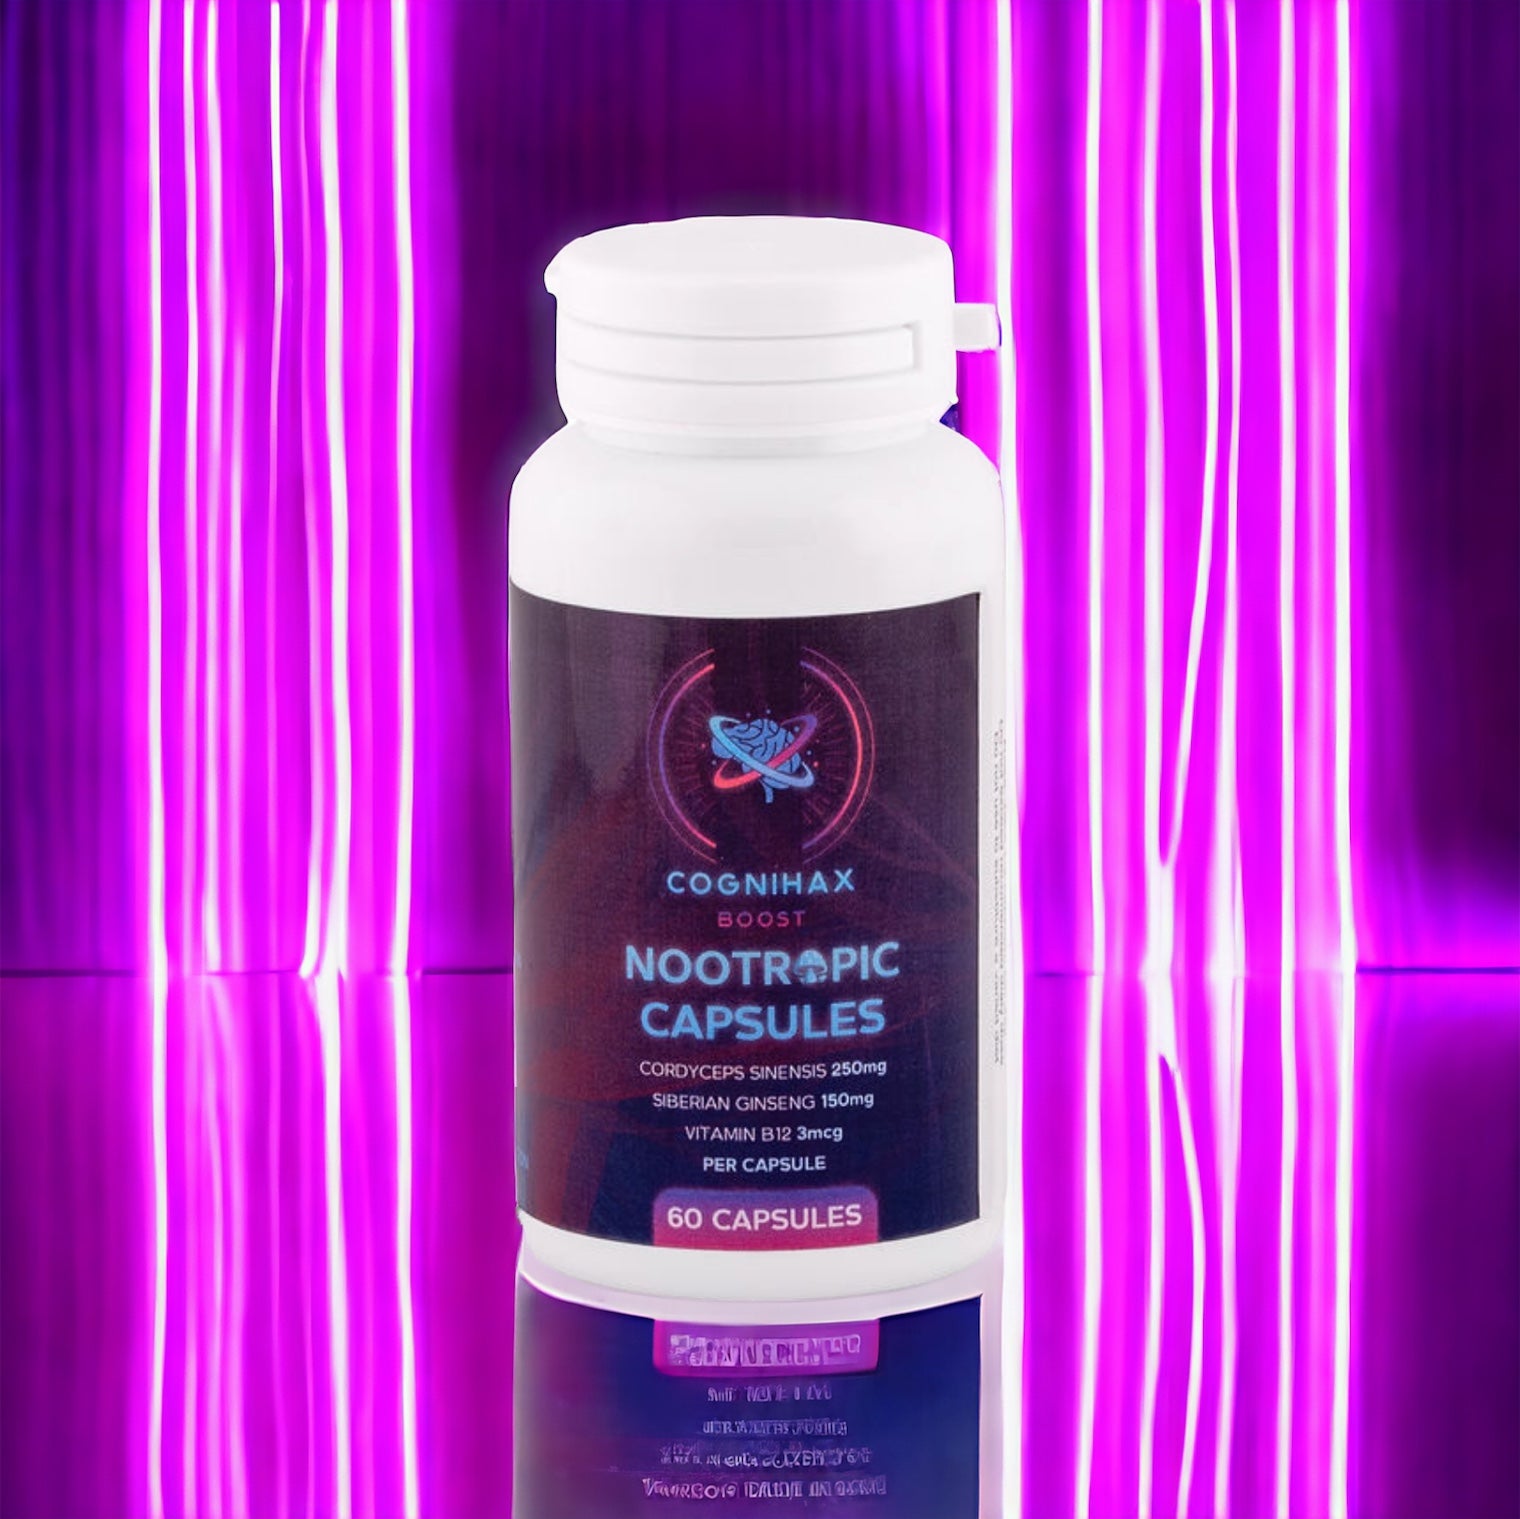 NOOTROPICS CAPSULES cordyceps and ginseng